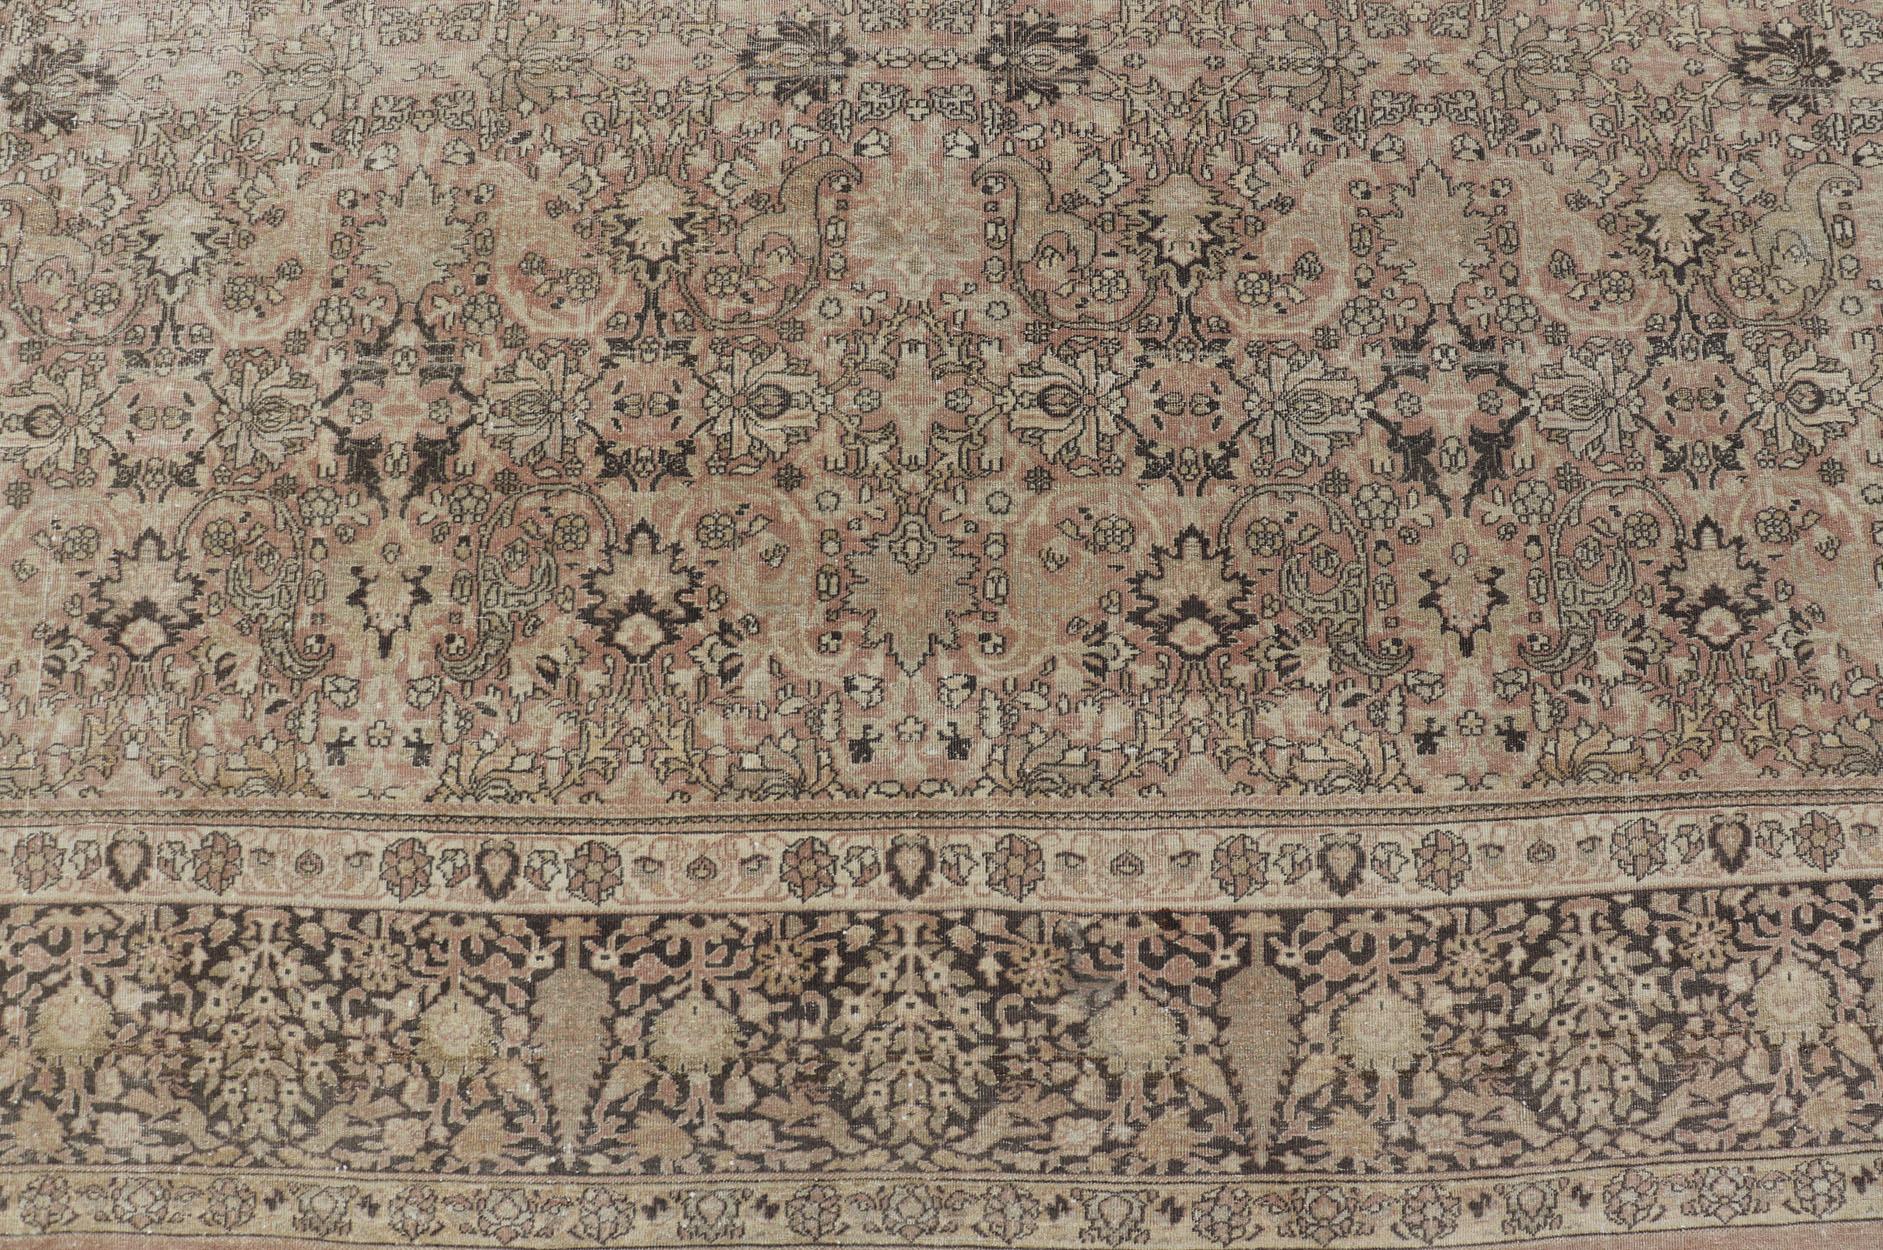 Wool Large Antique Turkish Sivas Rug with Floral Design in Earthy Neutral Tones  For Sale